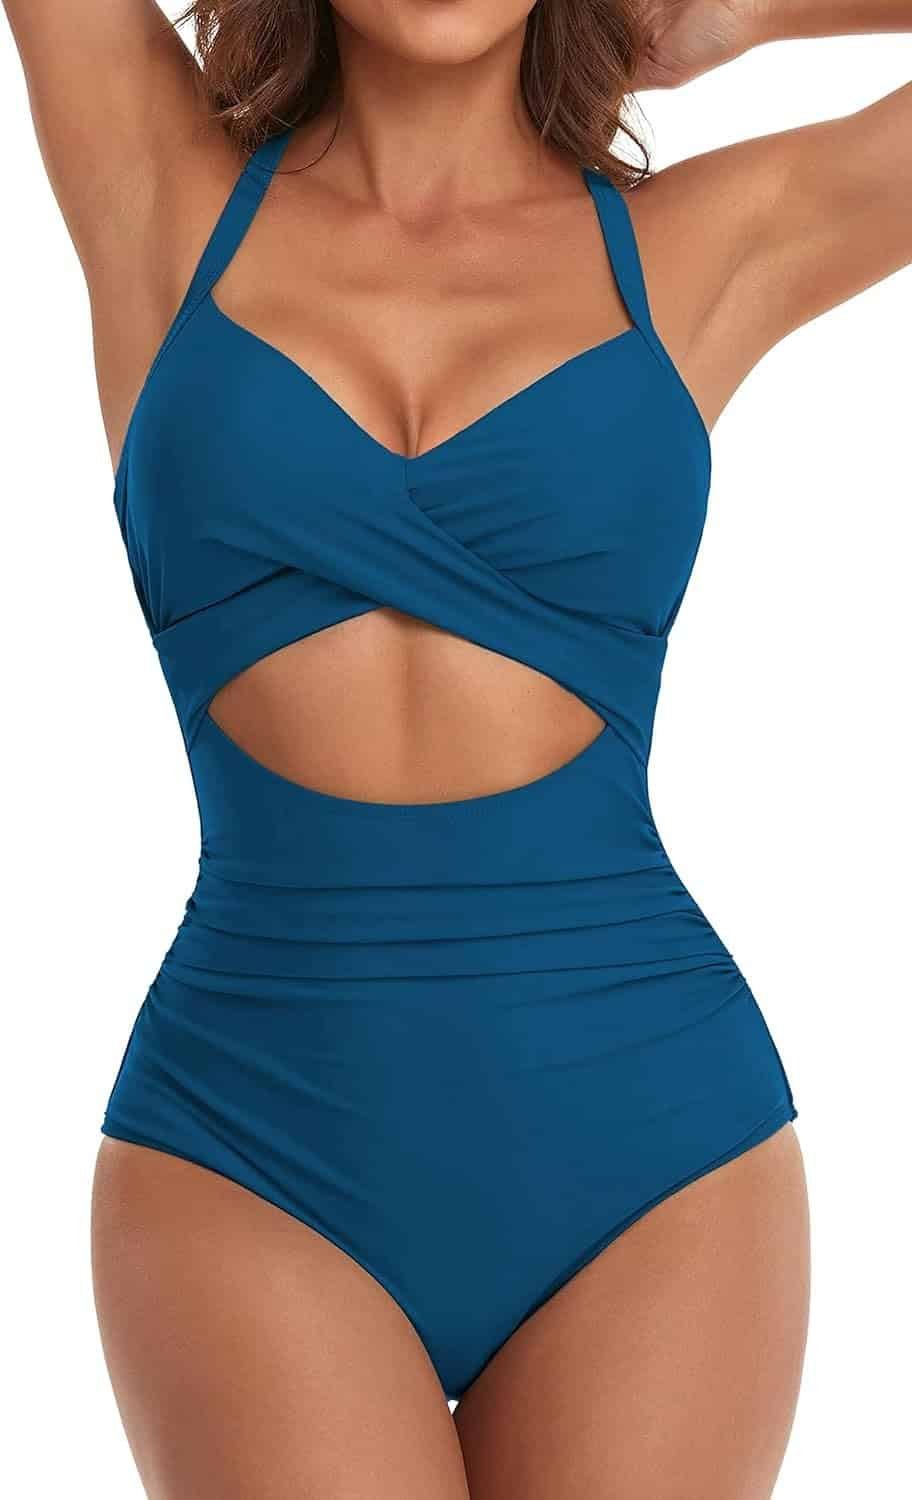 Eomenie Womens One Piece Swimsuits Tummy Control Cutout High Waisted Bathing Suit Wrap Tie Back 1 Piece Swimsuit